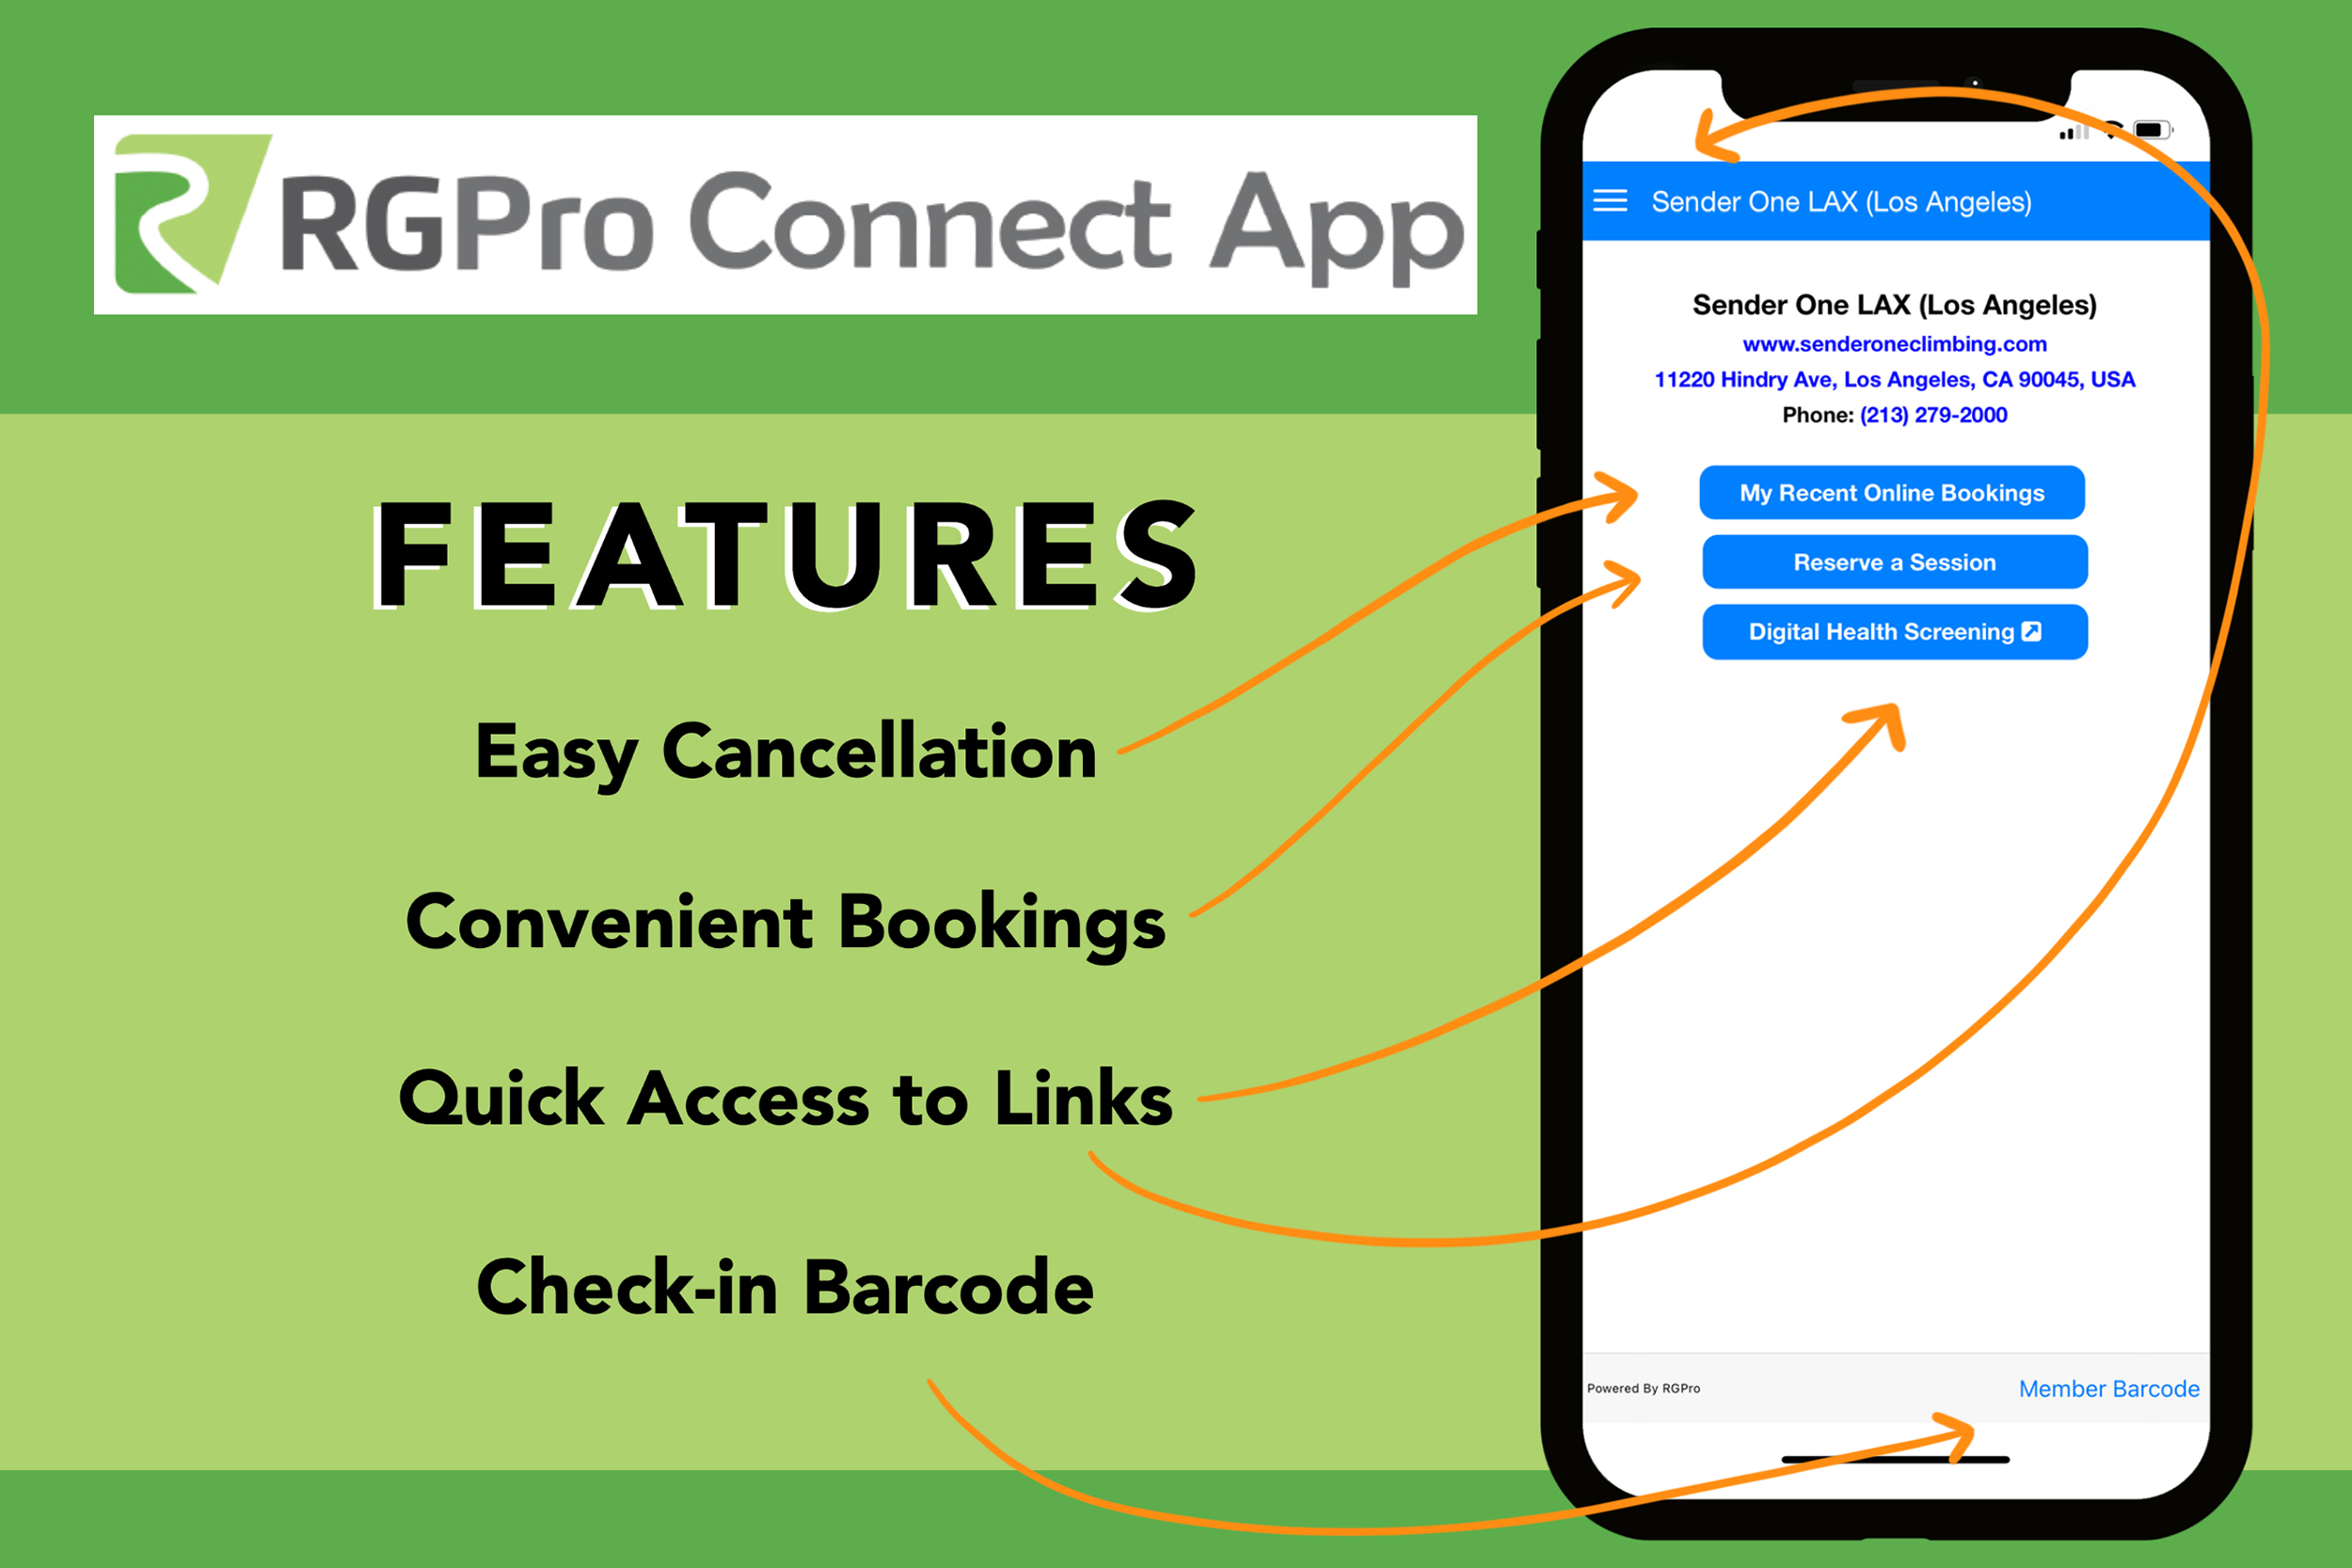 A diagram showing the phone application and its features with arrows pointing to the features. The features include: easy cancellation, convenient bookings, quick access to links, and a check-in barcode.